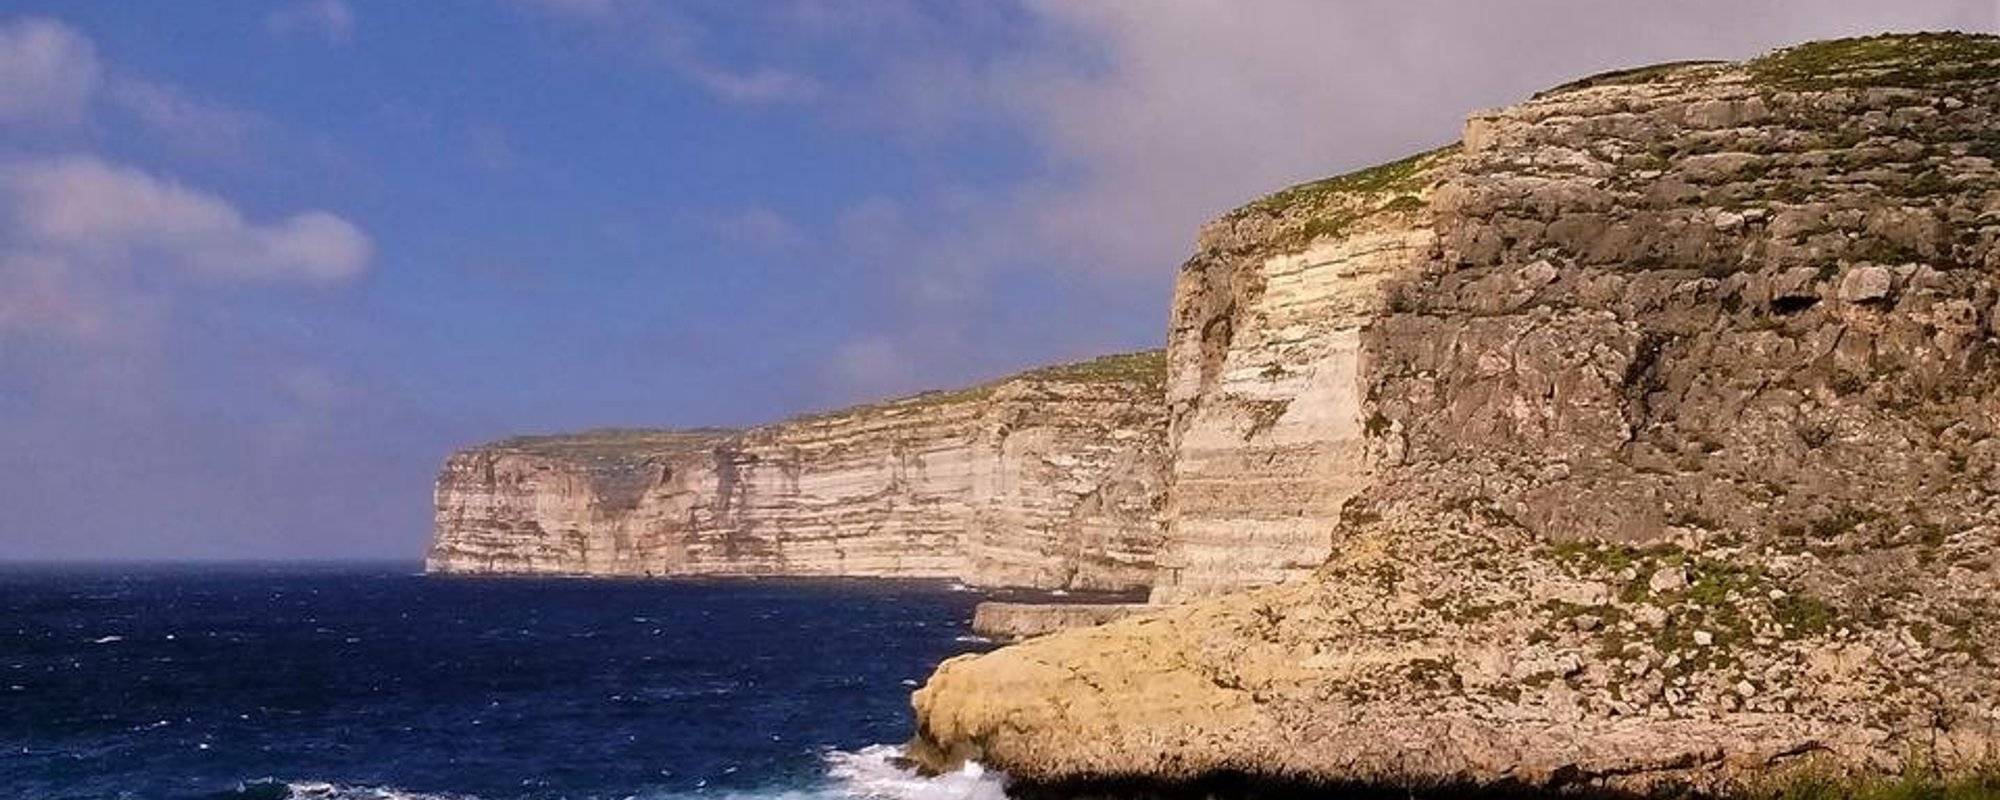 Landscape Photography: natural beauty of Gozo cliffs